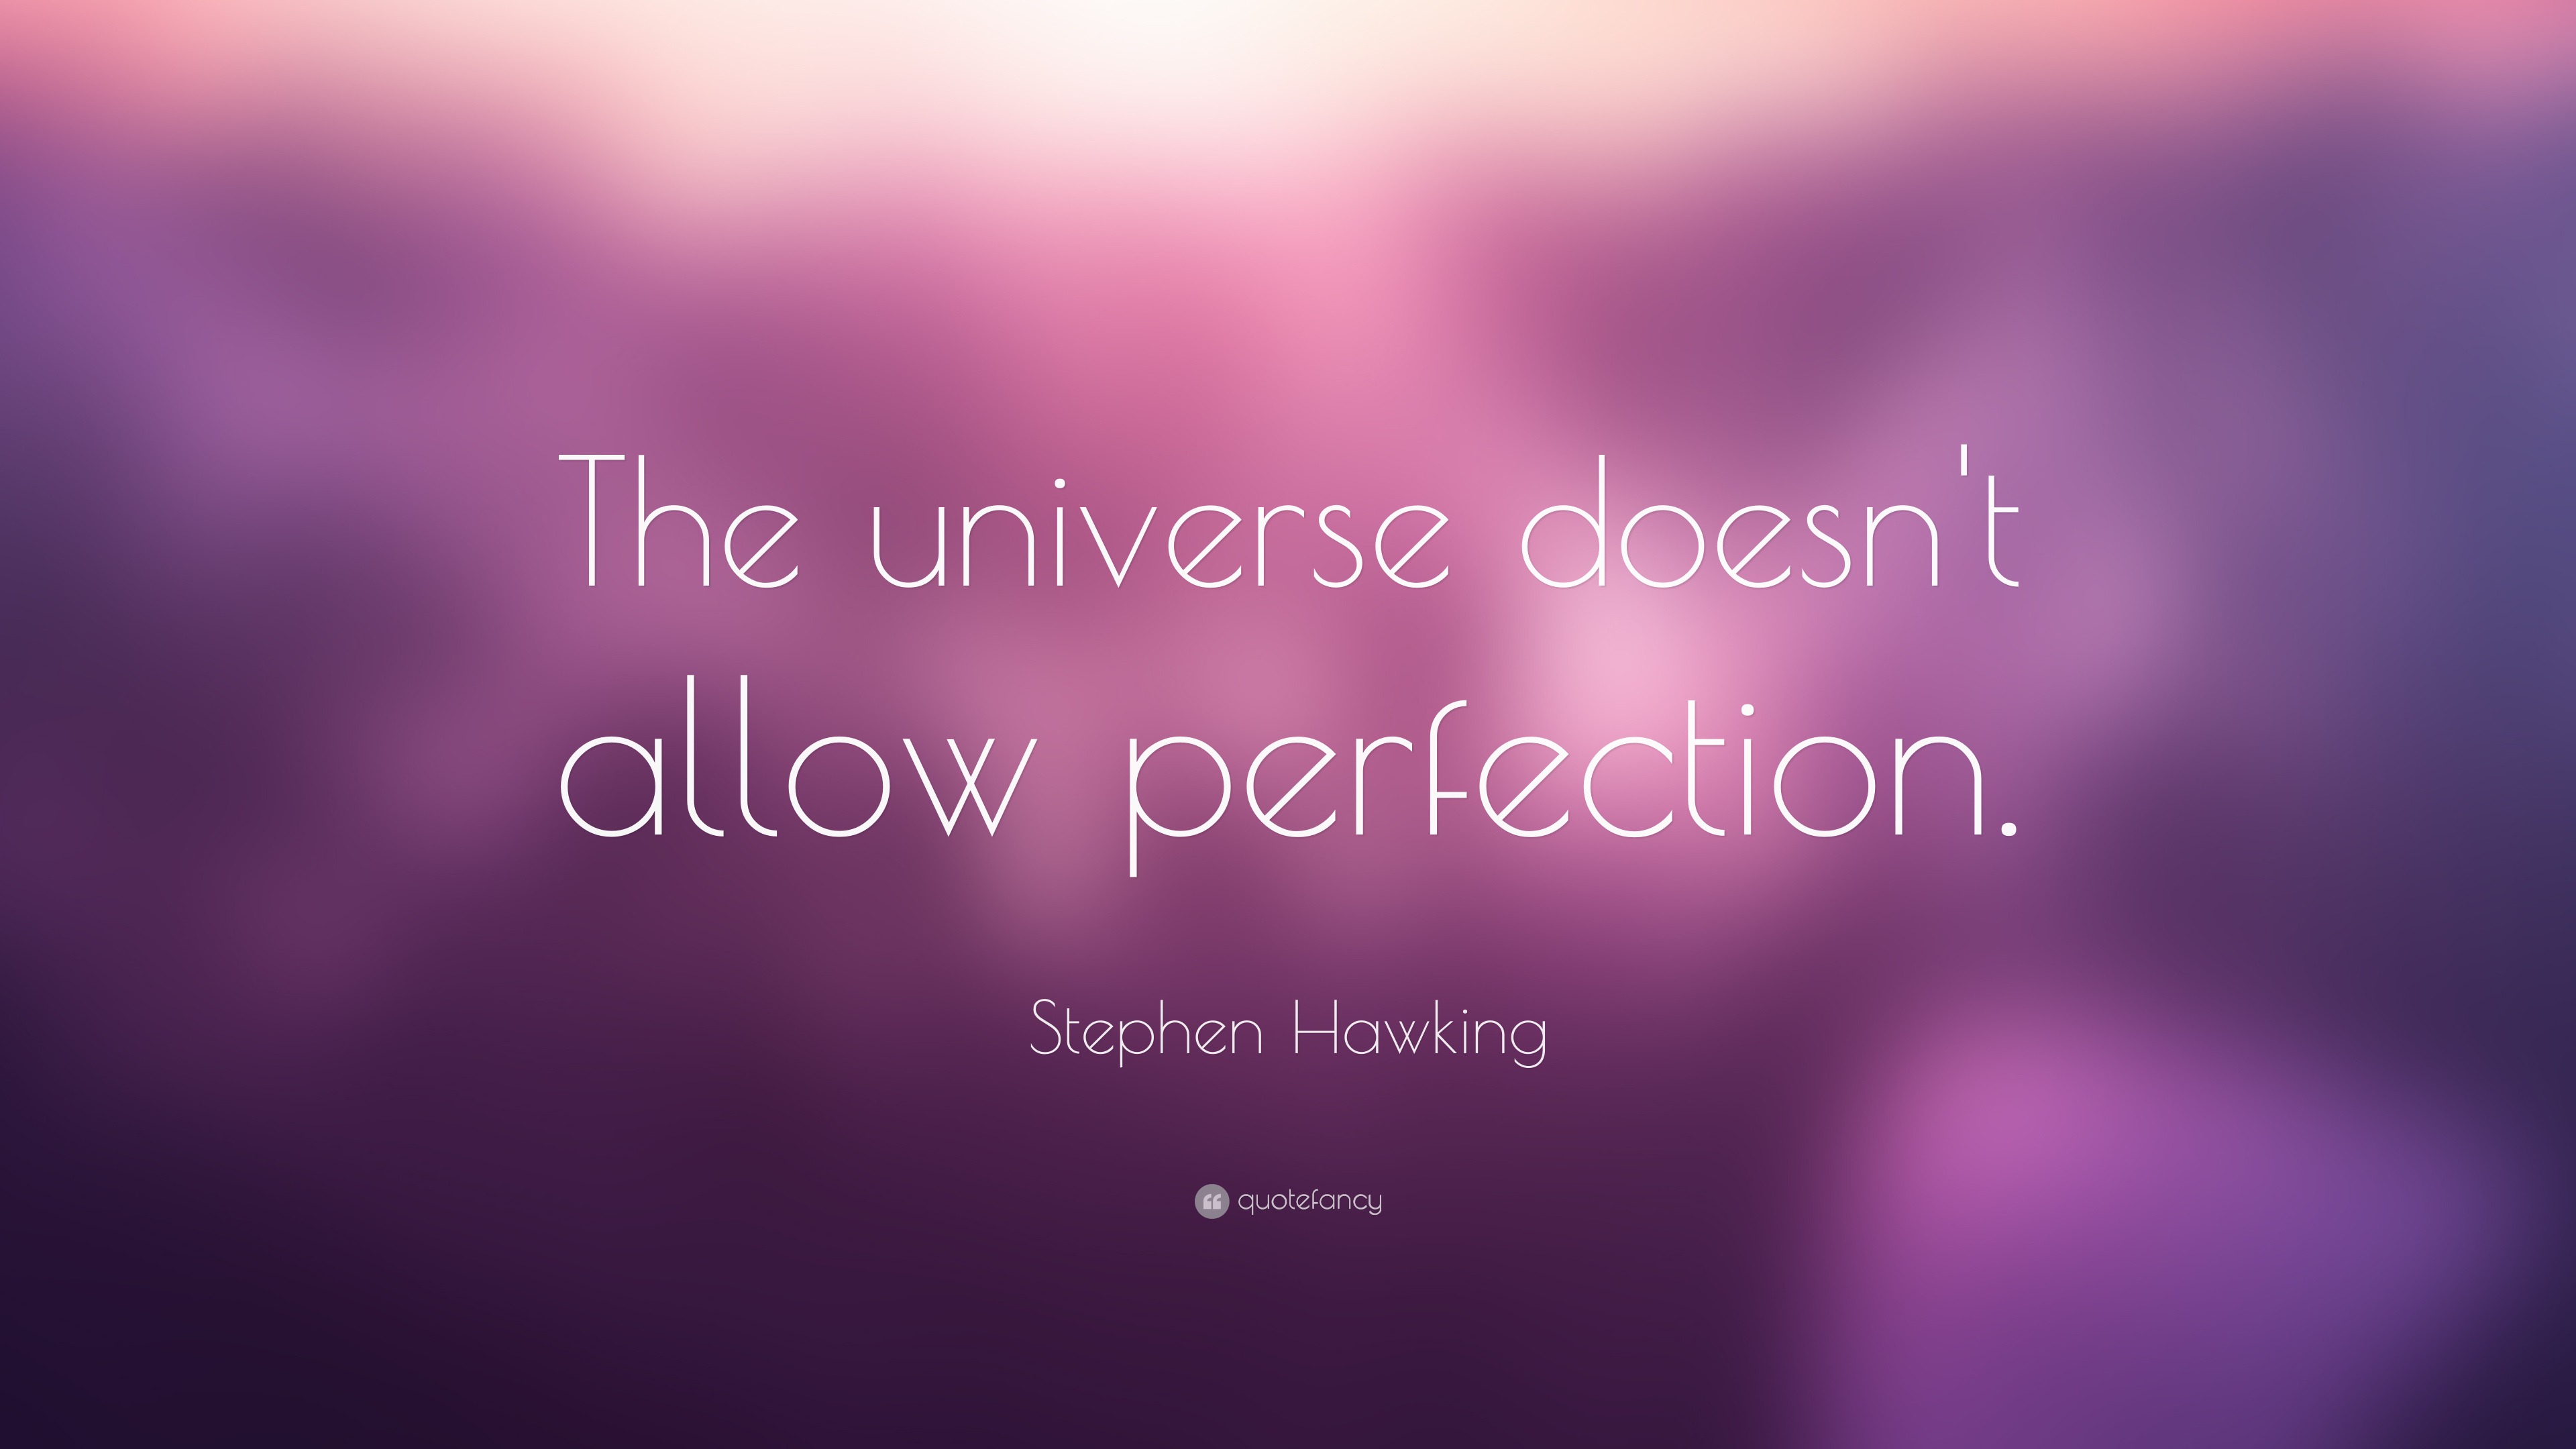 Stephen Hawking Quote: “The universe doesn't allow perfection.” (17 ...